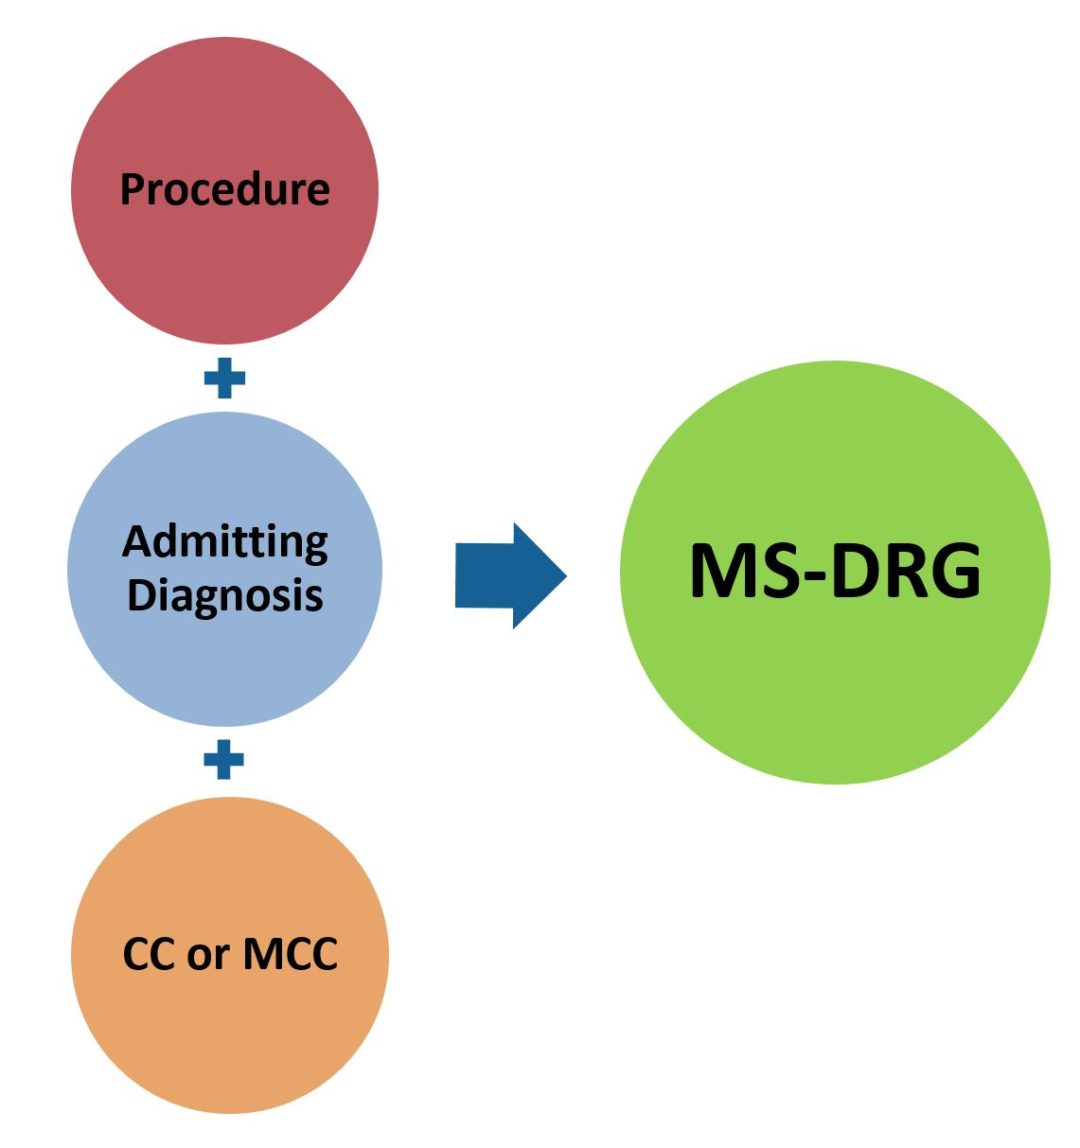 ms drg assignment is not based on information that includes